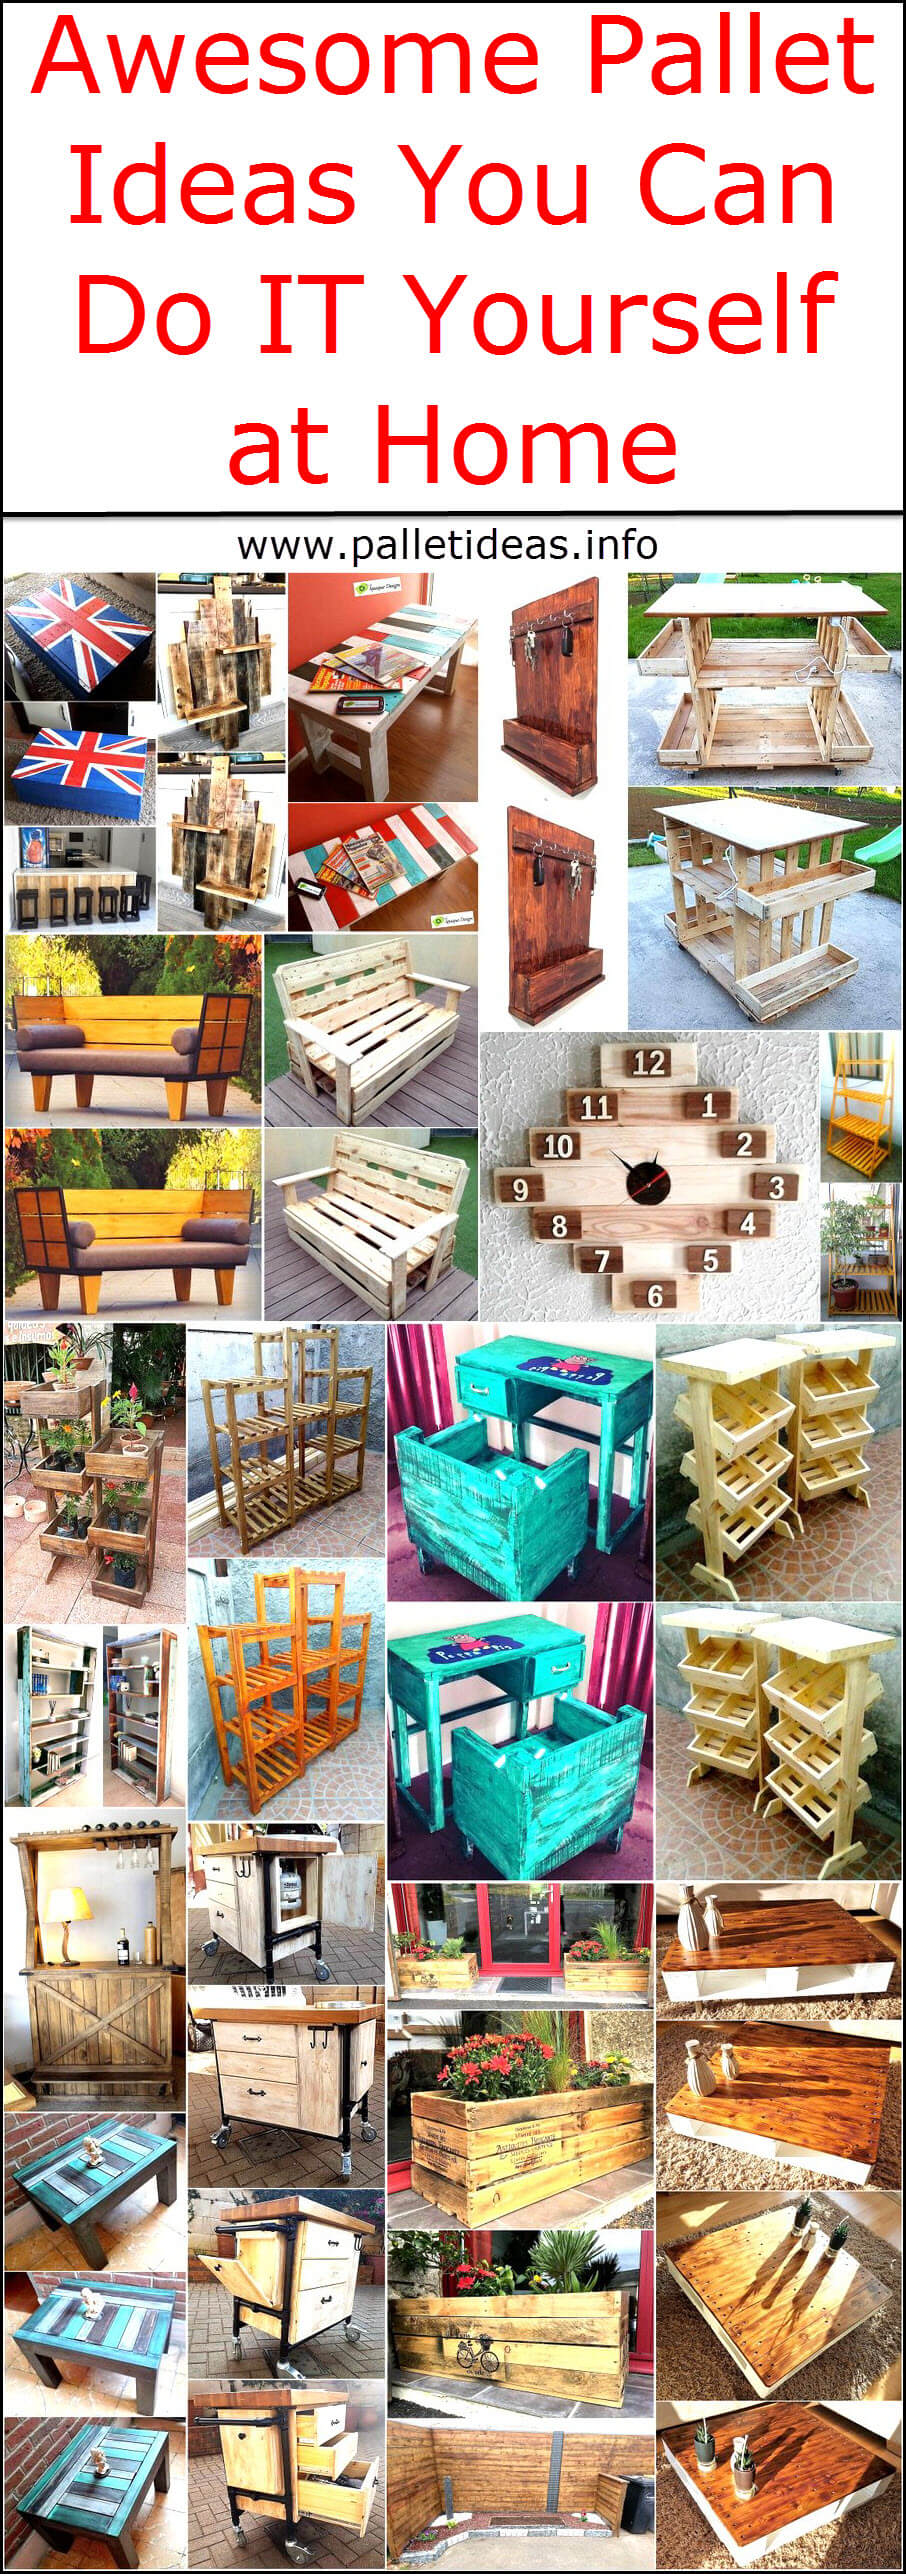 Awesome Pallet Ideas You Can Do IT Yourself at Home